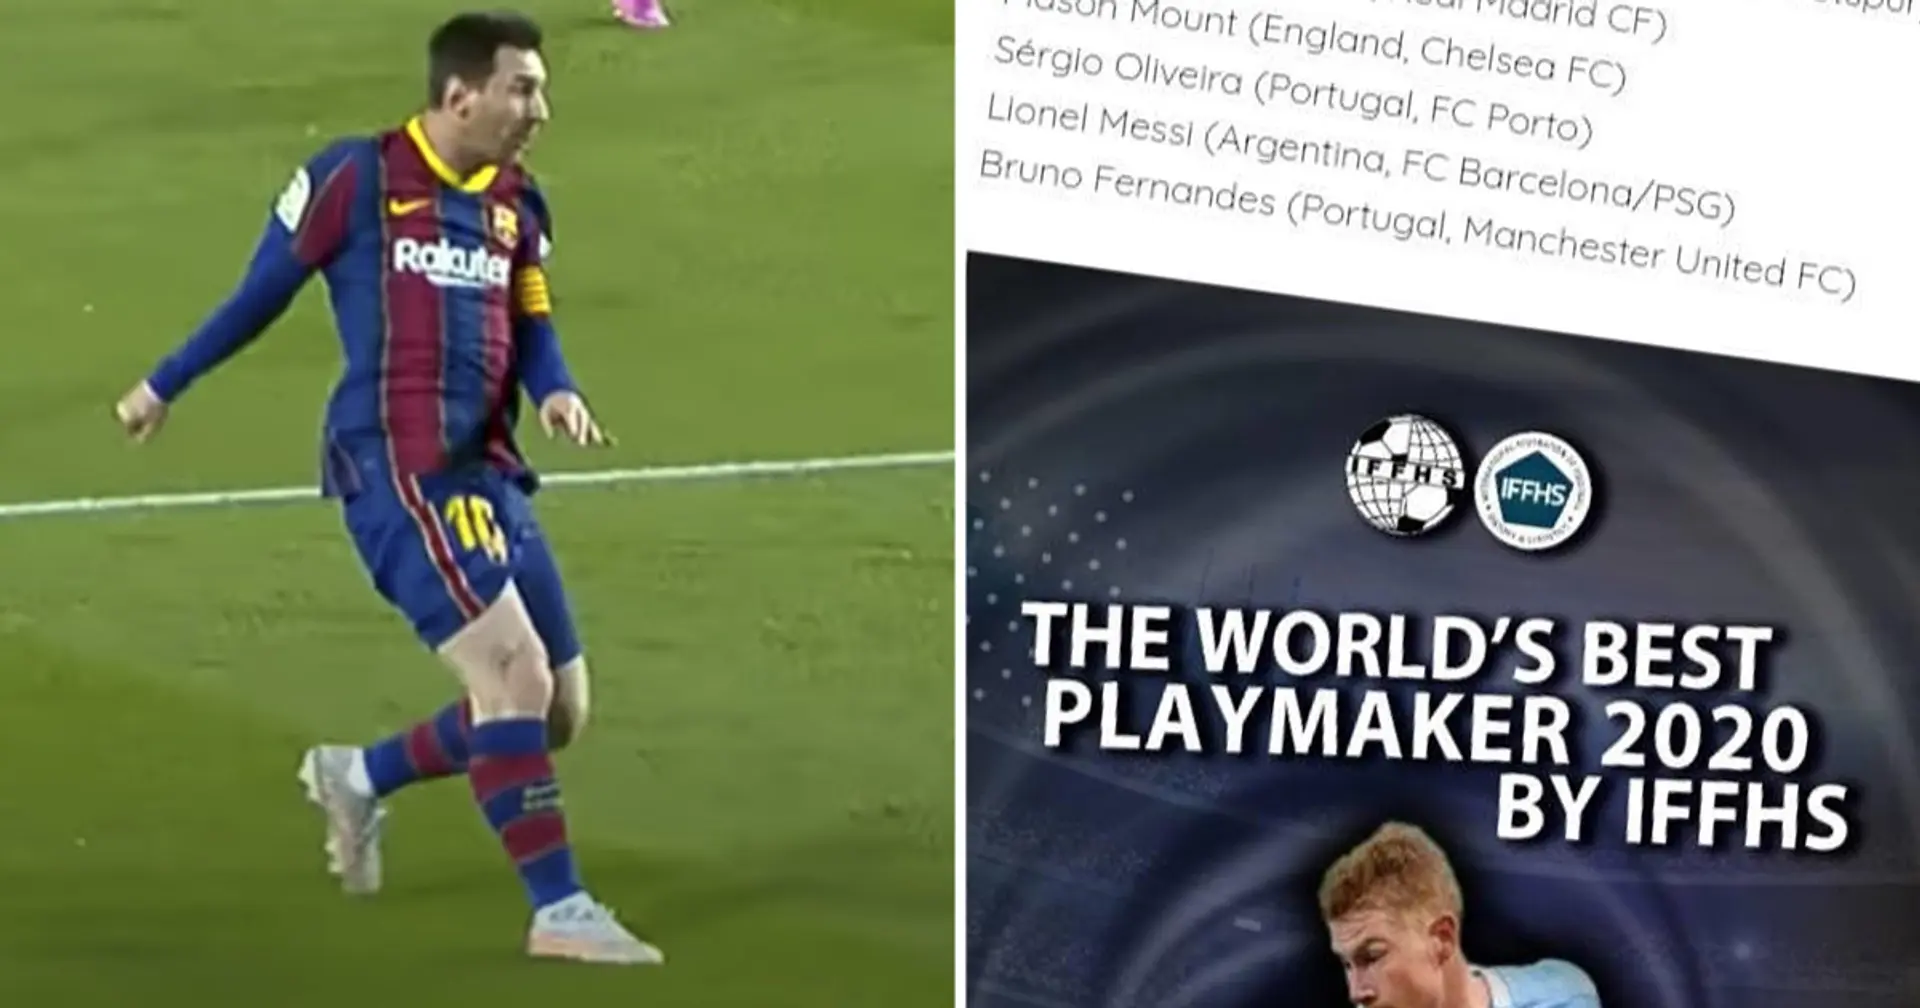 Messi shortlisted for 2021 IFFHS Best Playmaker award, one Barca player in